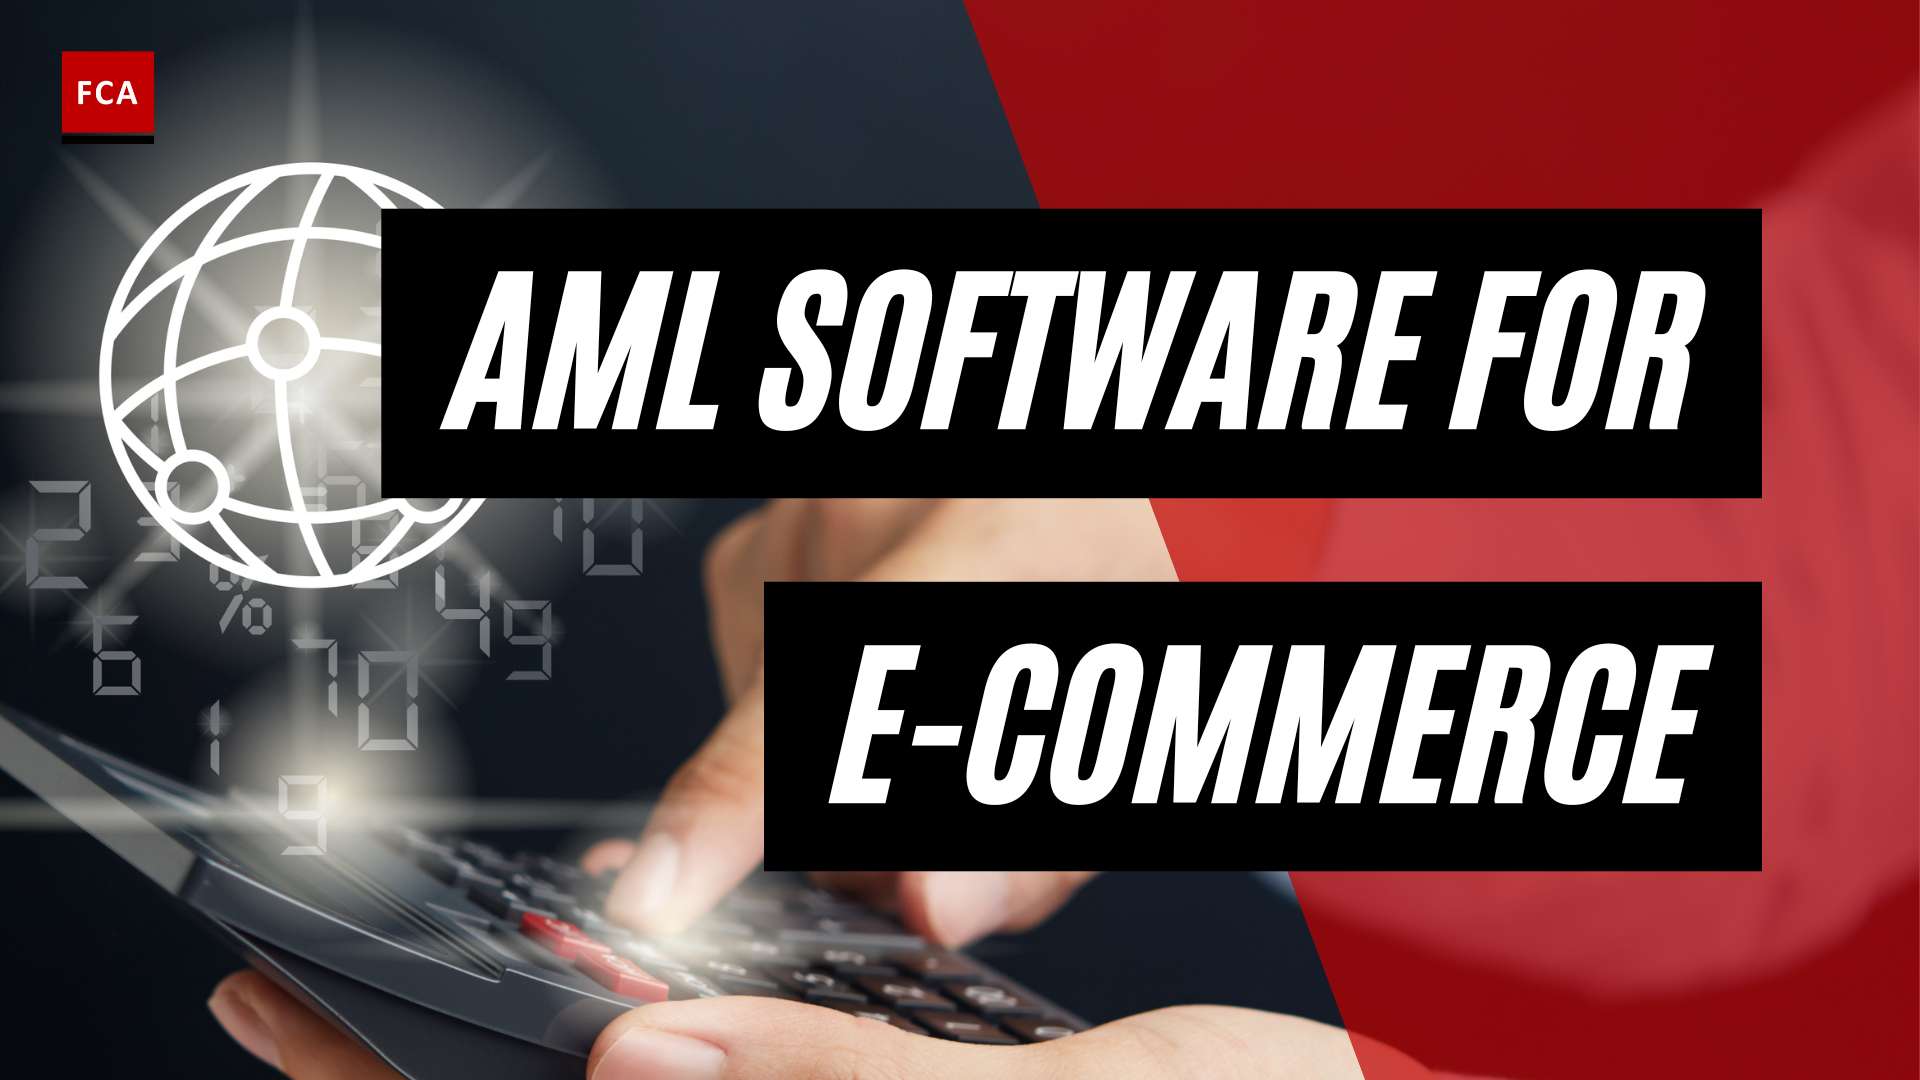 From Risk To Resilience: Aml Software Solutions For E-Commerce